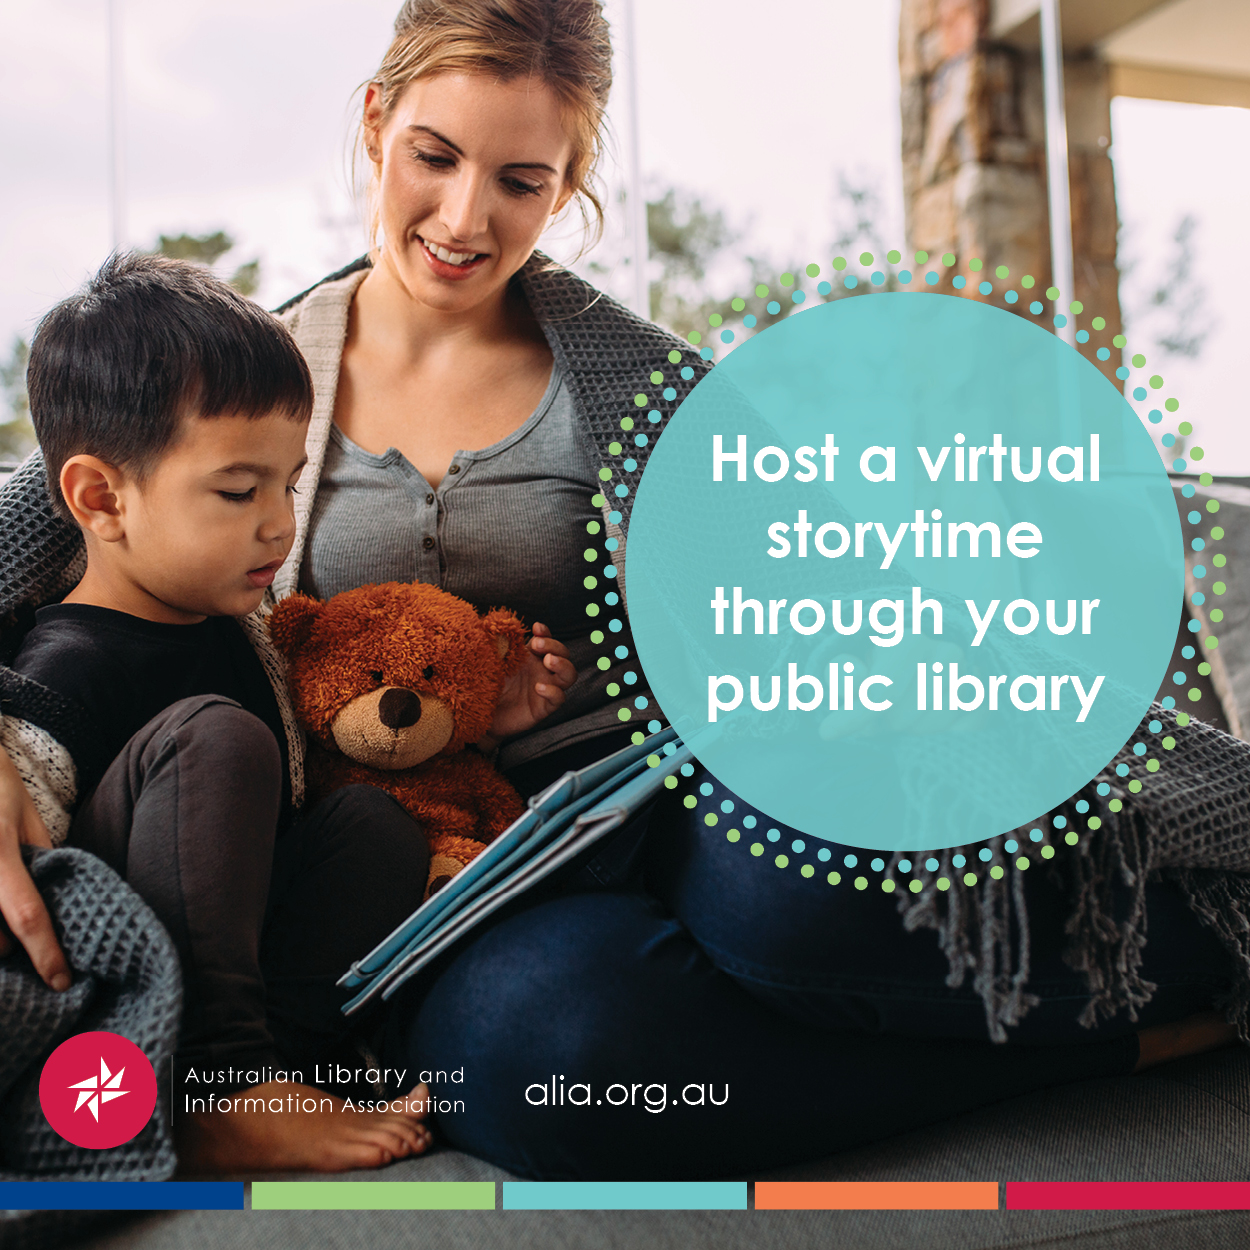 A photograph of a woman and child reading a book. White text in a blue circle reads 'Host a virtual storytime through your public library'.